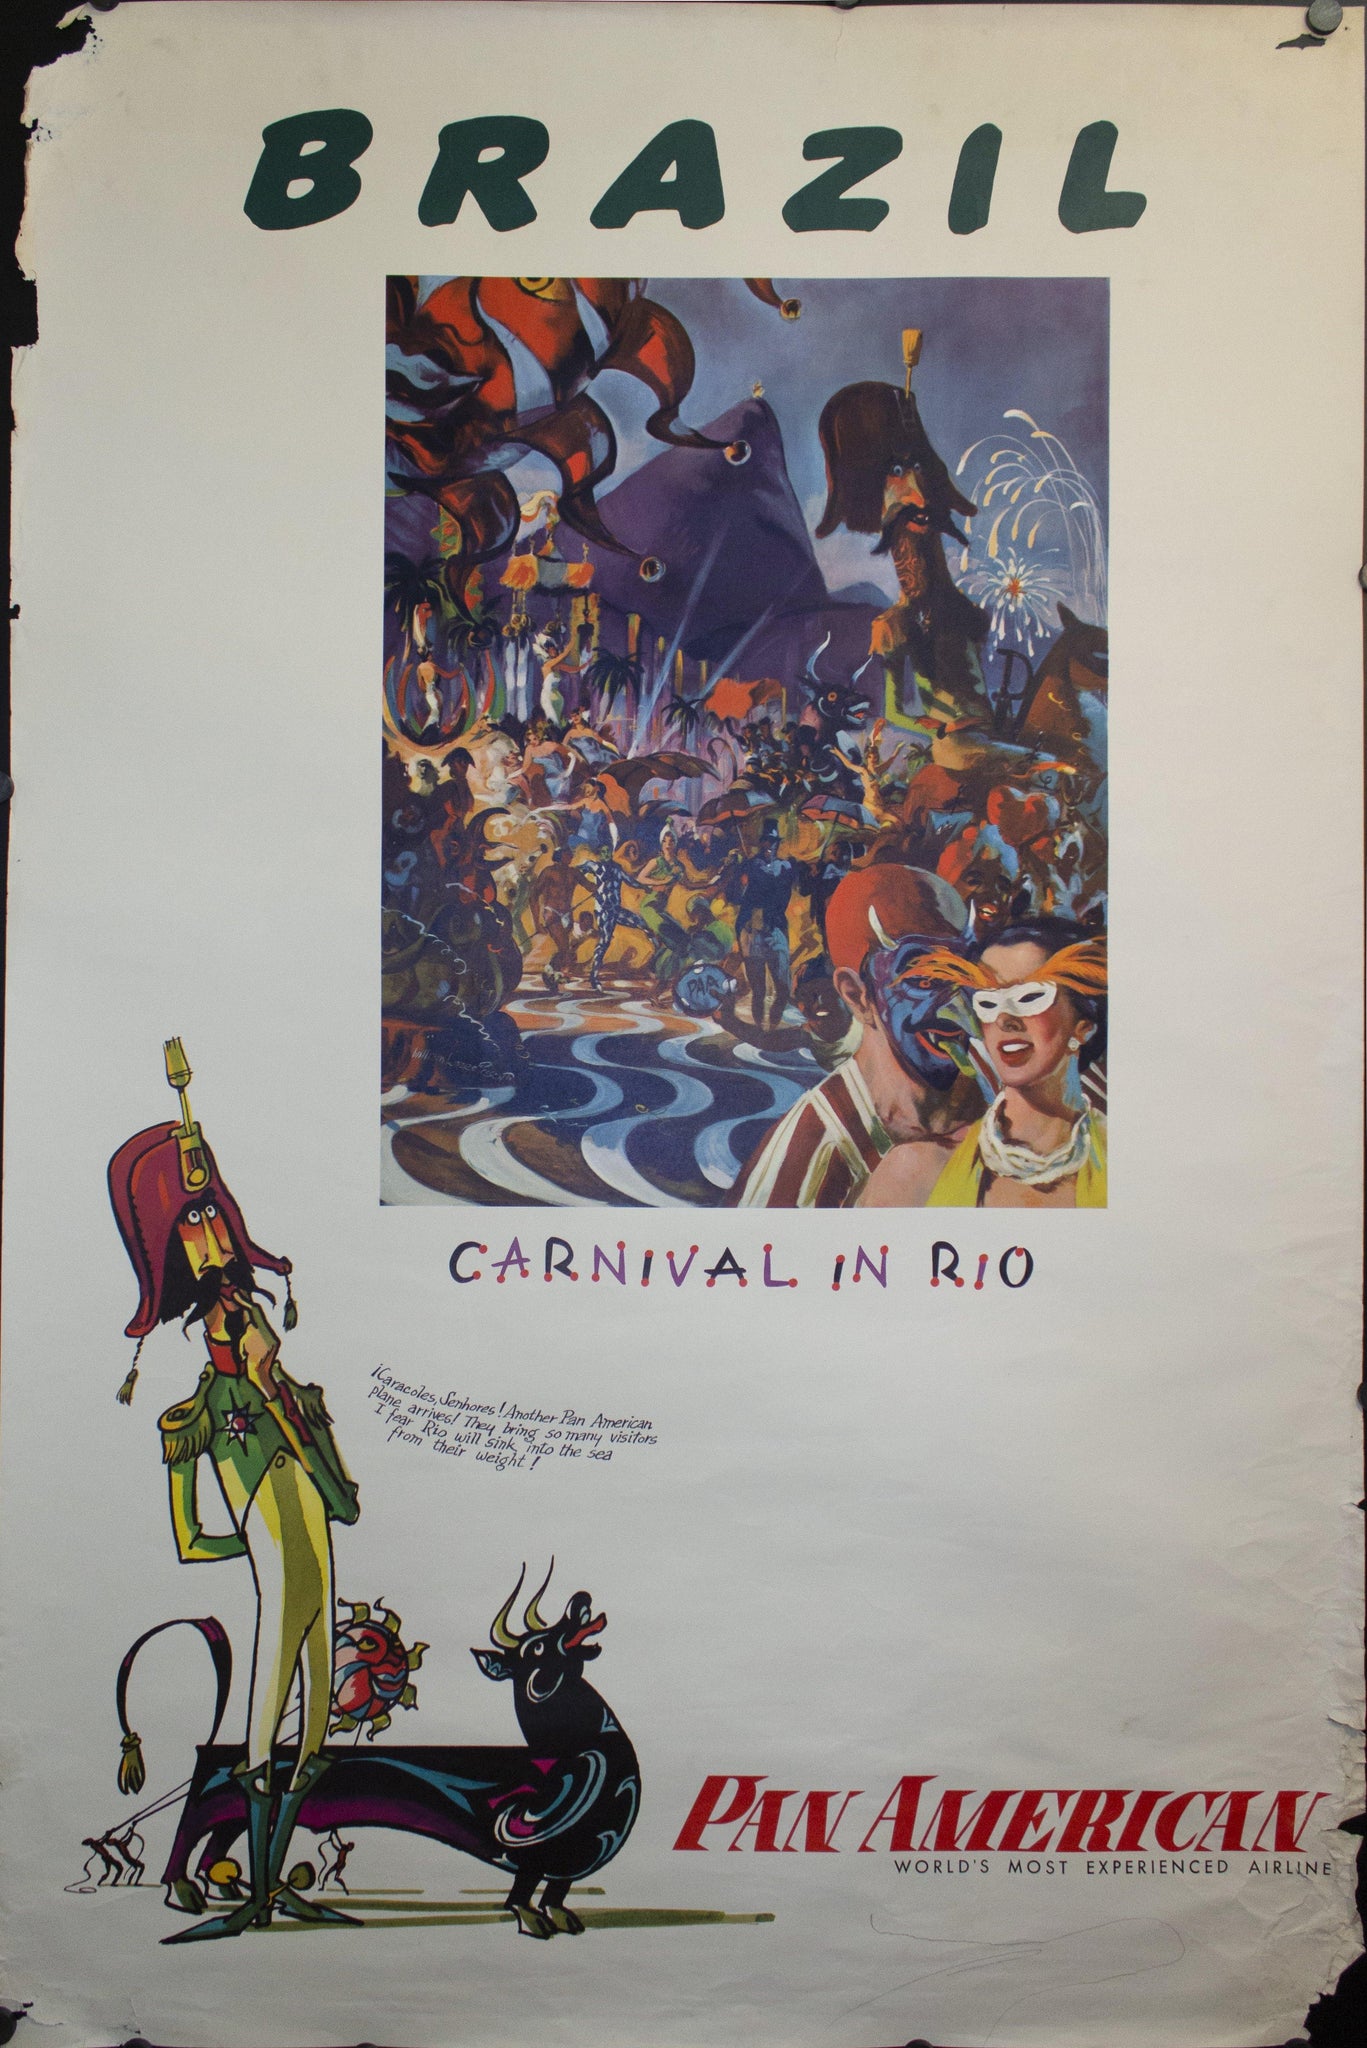 Brazil | Carnival in Rio | Pan American Airlines by William Linzee Prescott - Golden Age Posters